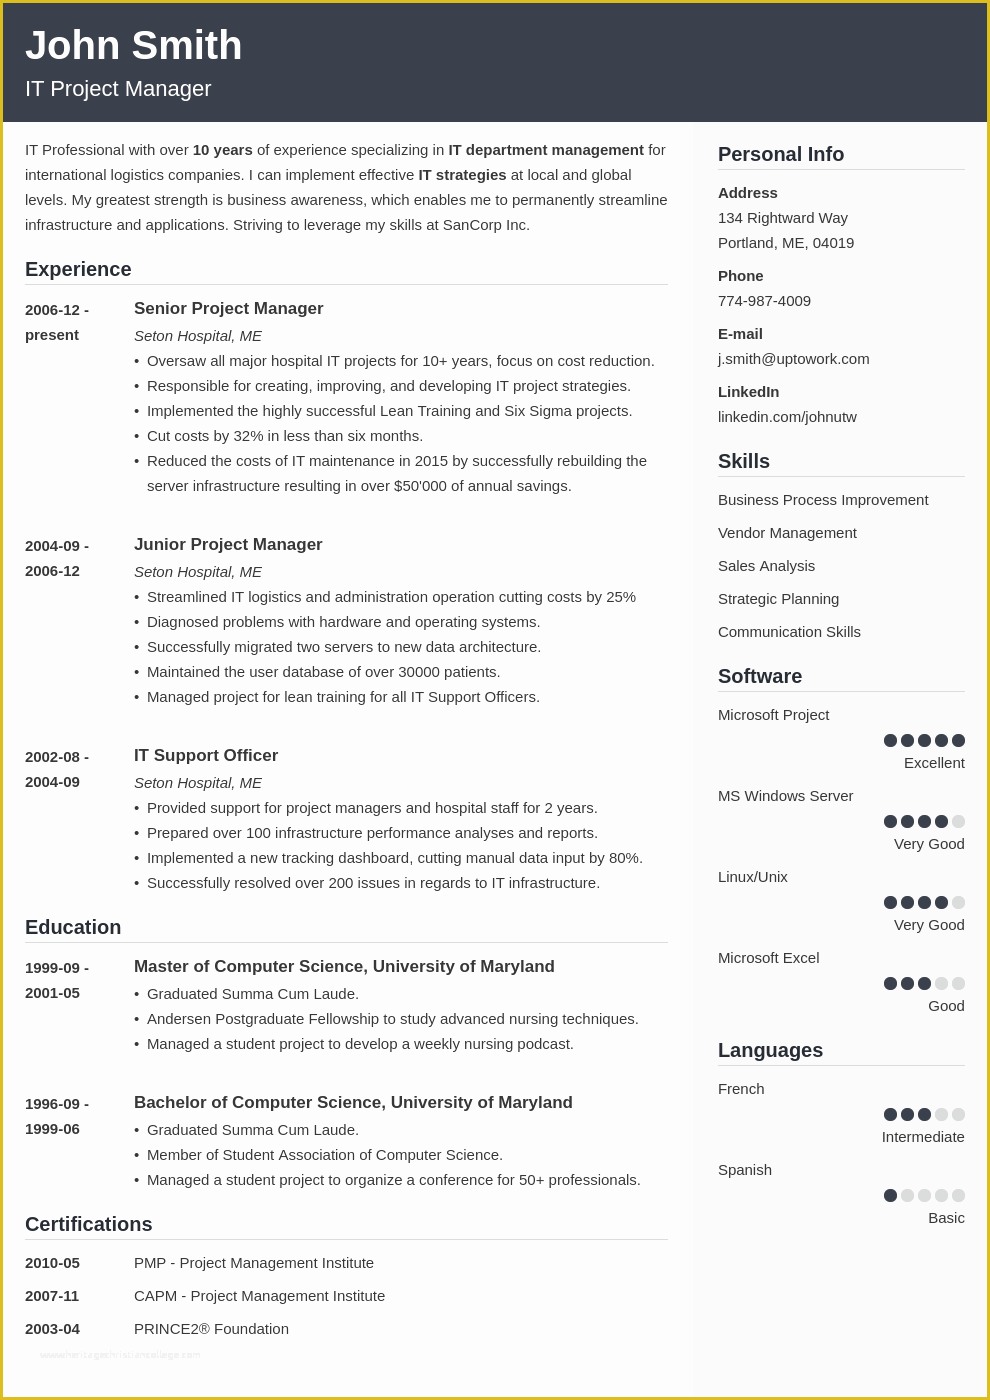 Best Free Cv Templates Of 20 Cv Templates Create A Professional Cv & Download In 5